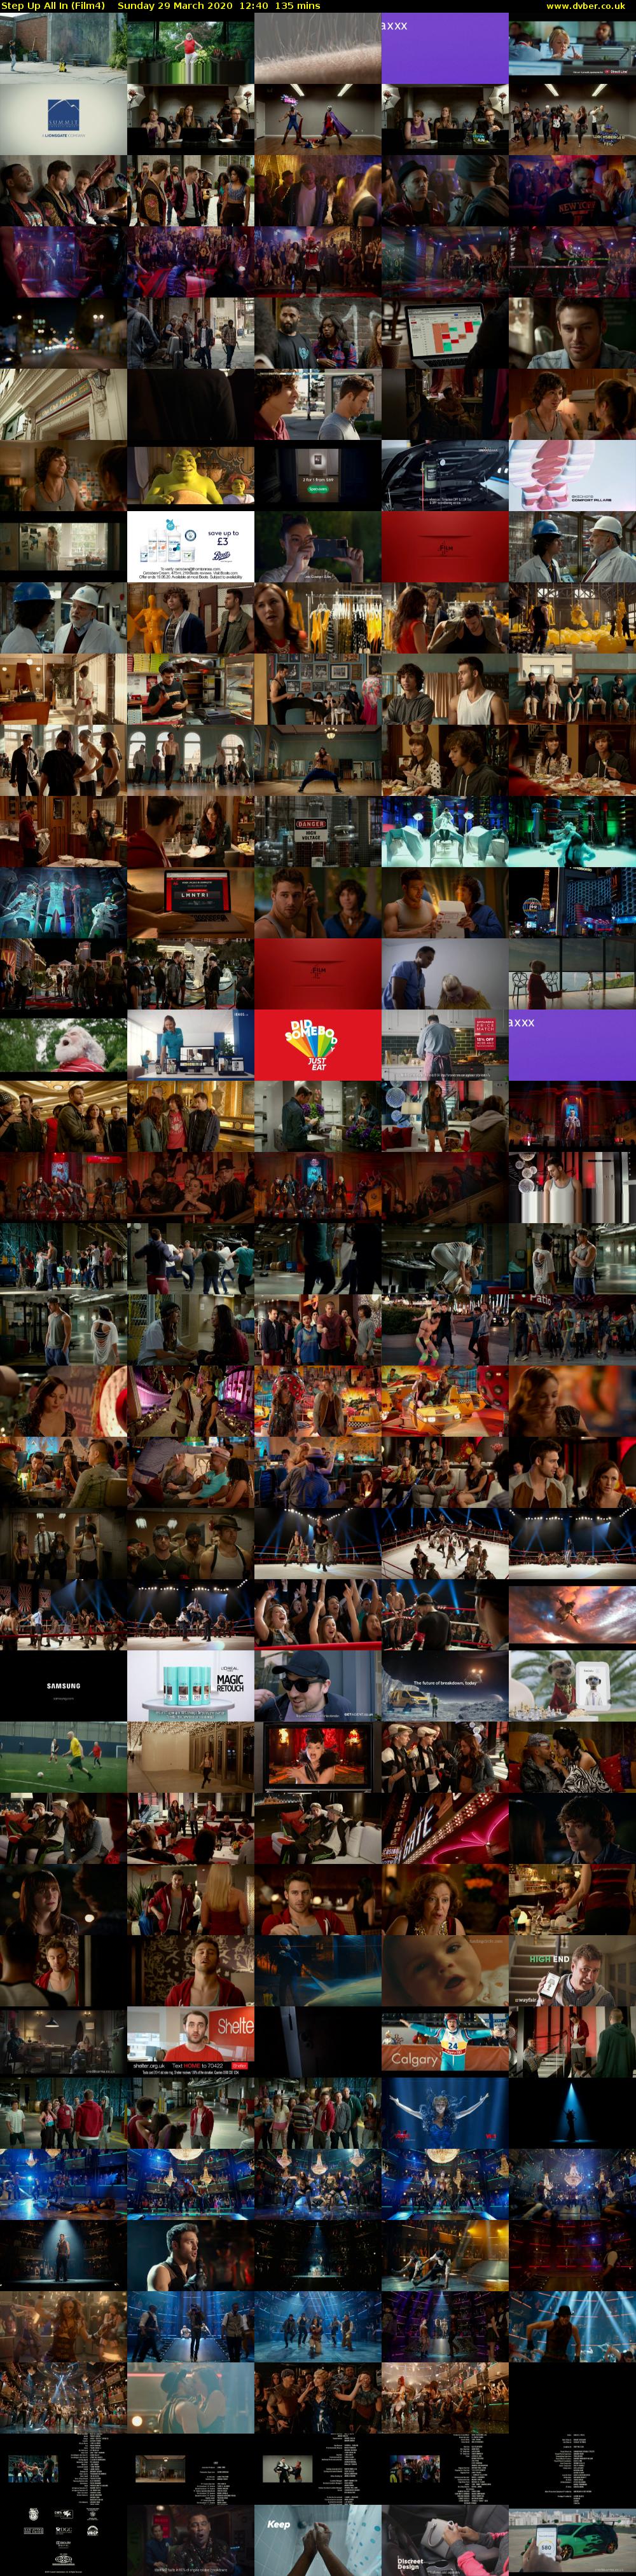 Step Up All In (Film4) Sunday 29 March 2020 12:40 - 14:55